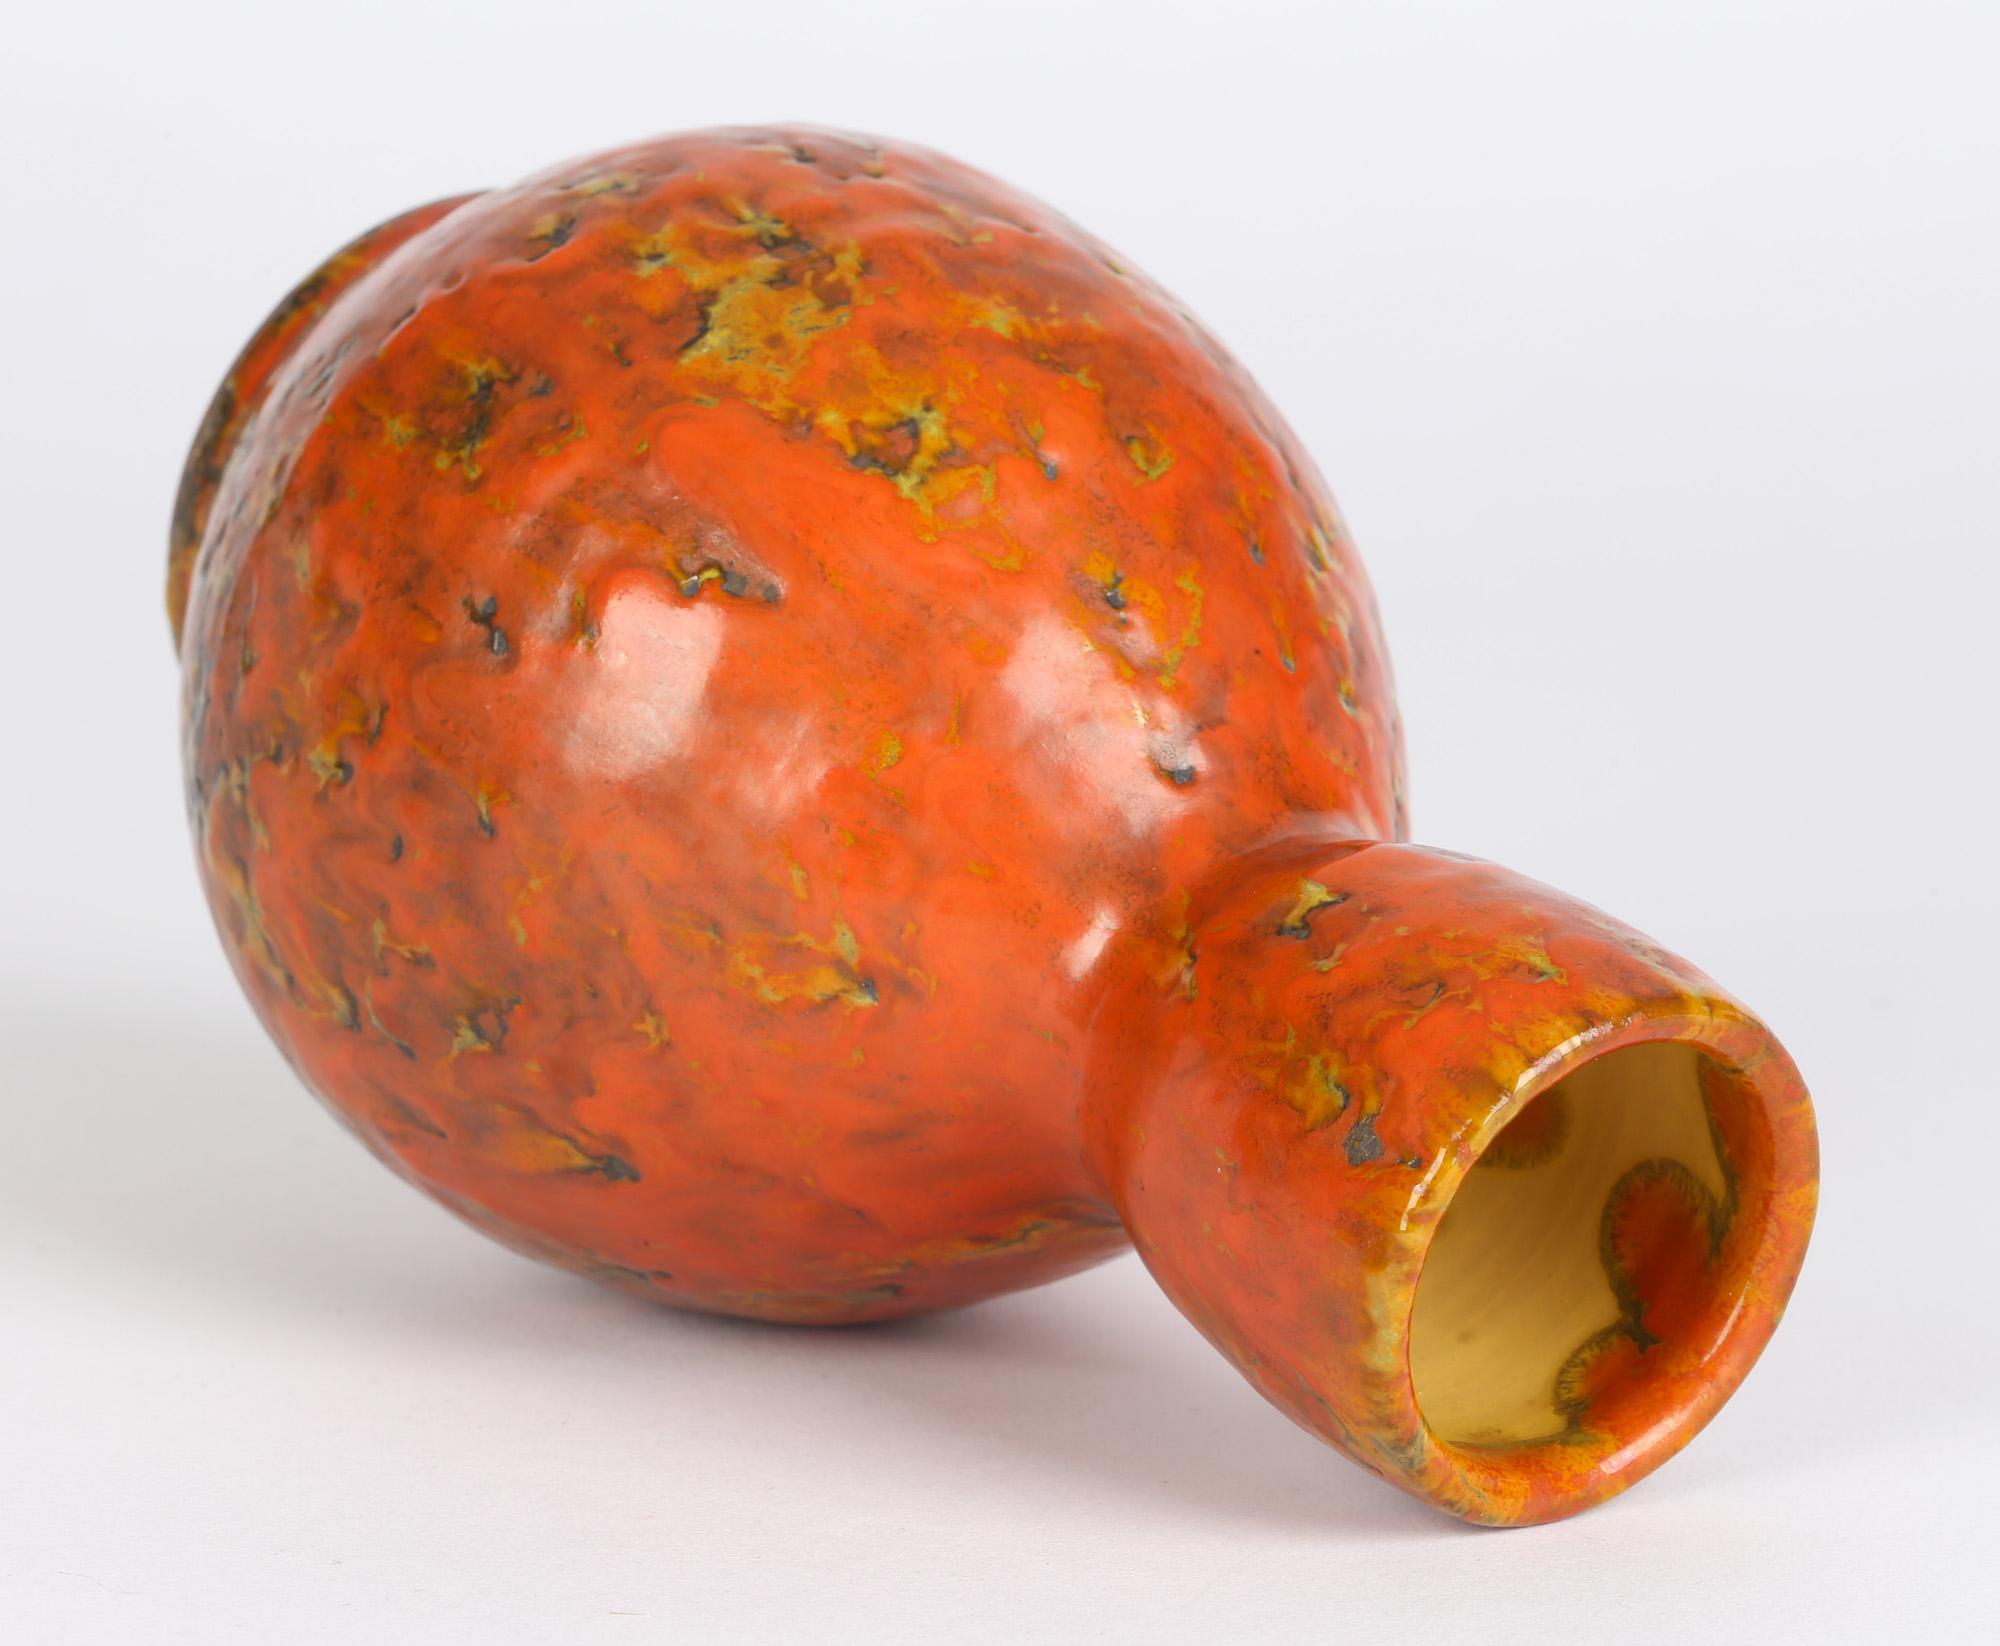 A stylish Continental attributed, possibly German, mid-century art pottery vase decorated in bright orange mottled and textured glazes. The vase made from a terracotta colored clay stands raised on a narrow rounded and unglazed foot, with a rounded